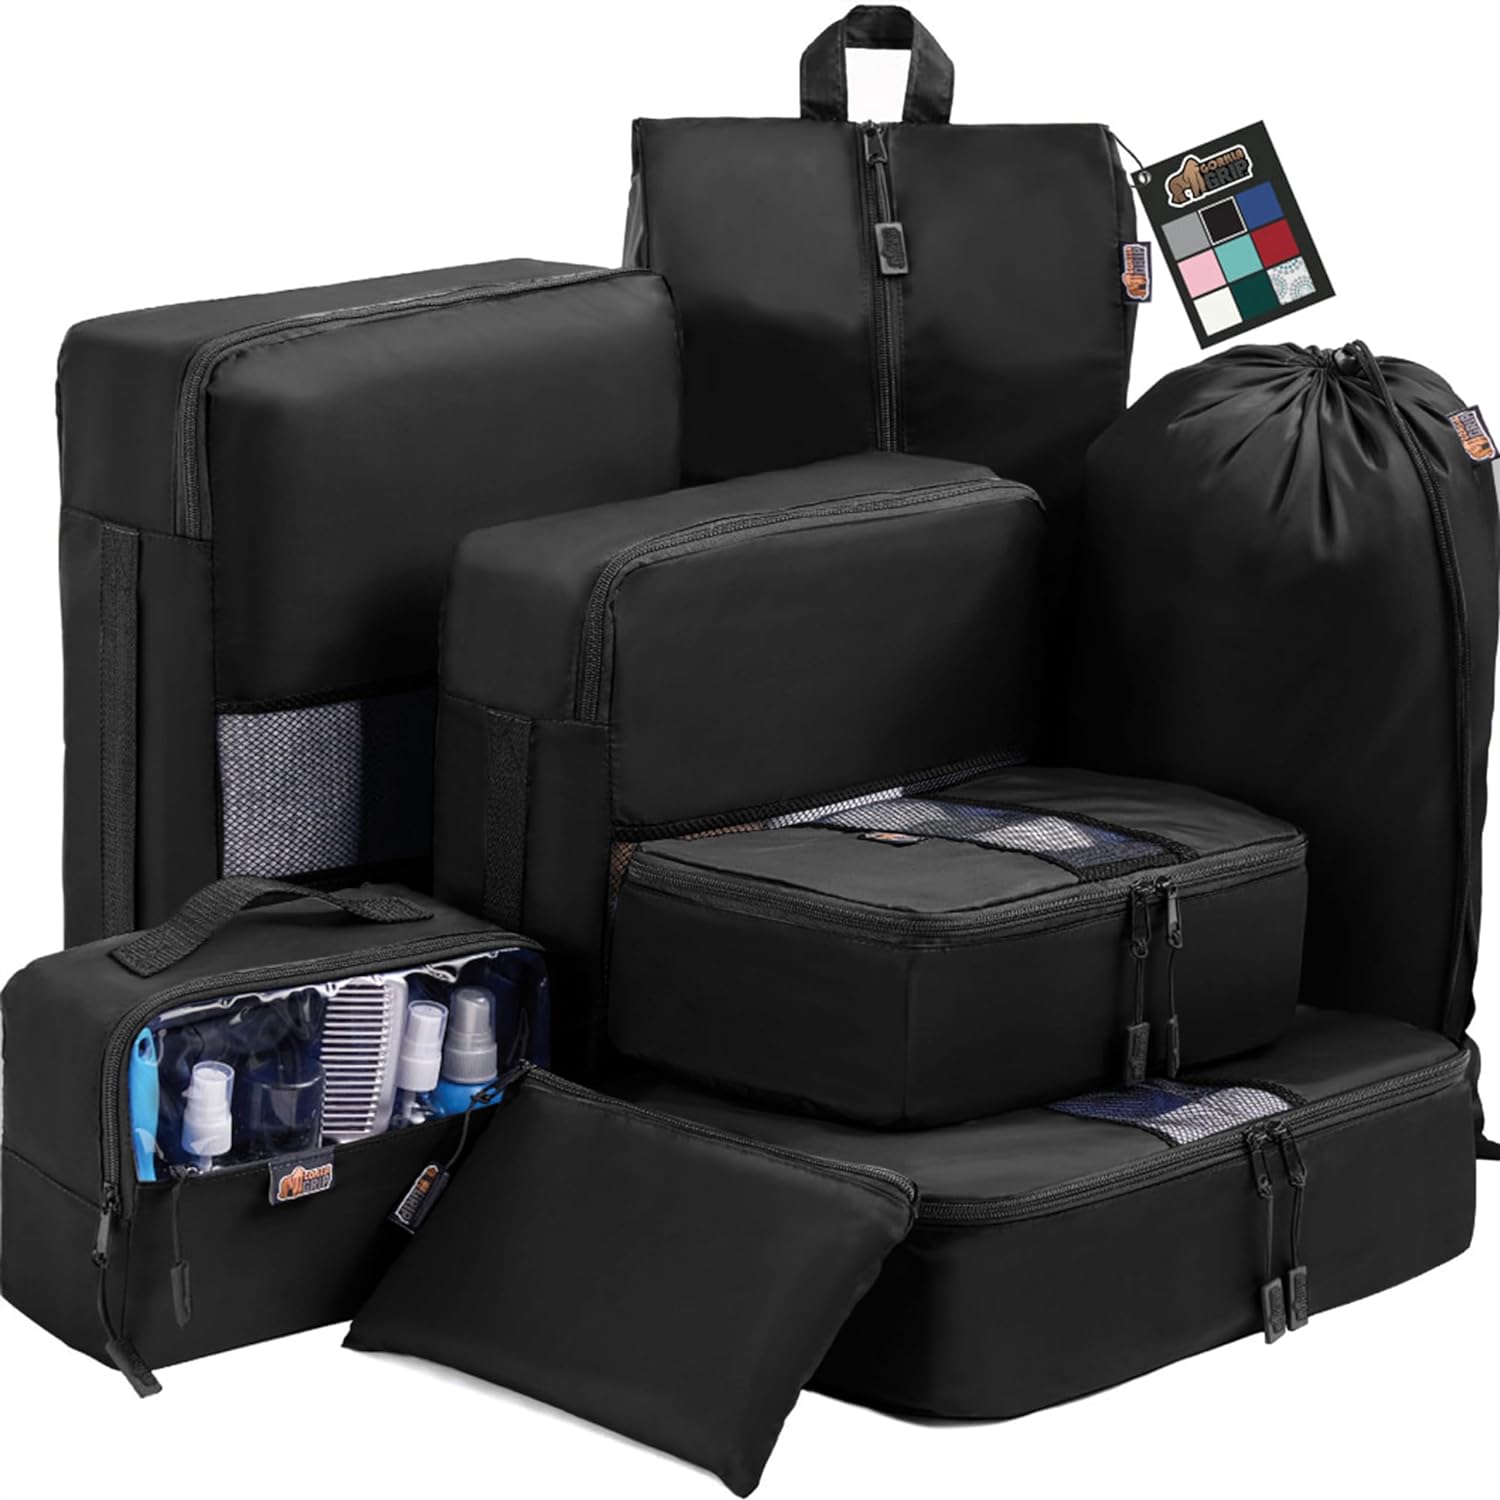 6pc. Travel Luggage Set, Packing Bags, Space Saver Cubes System, Durable  Pac Organiser.